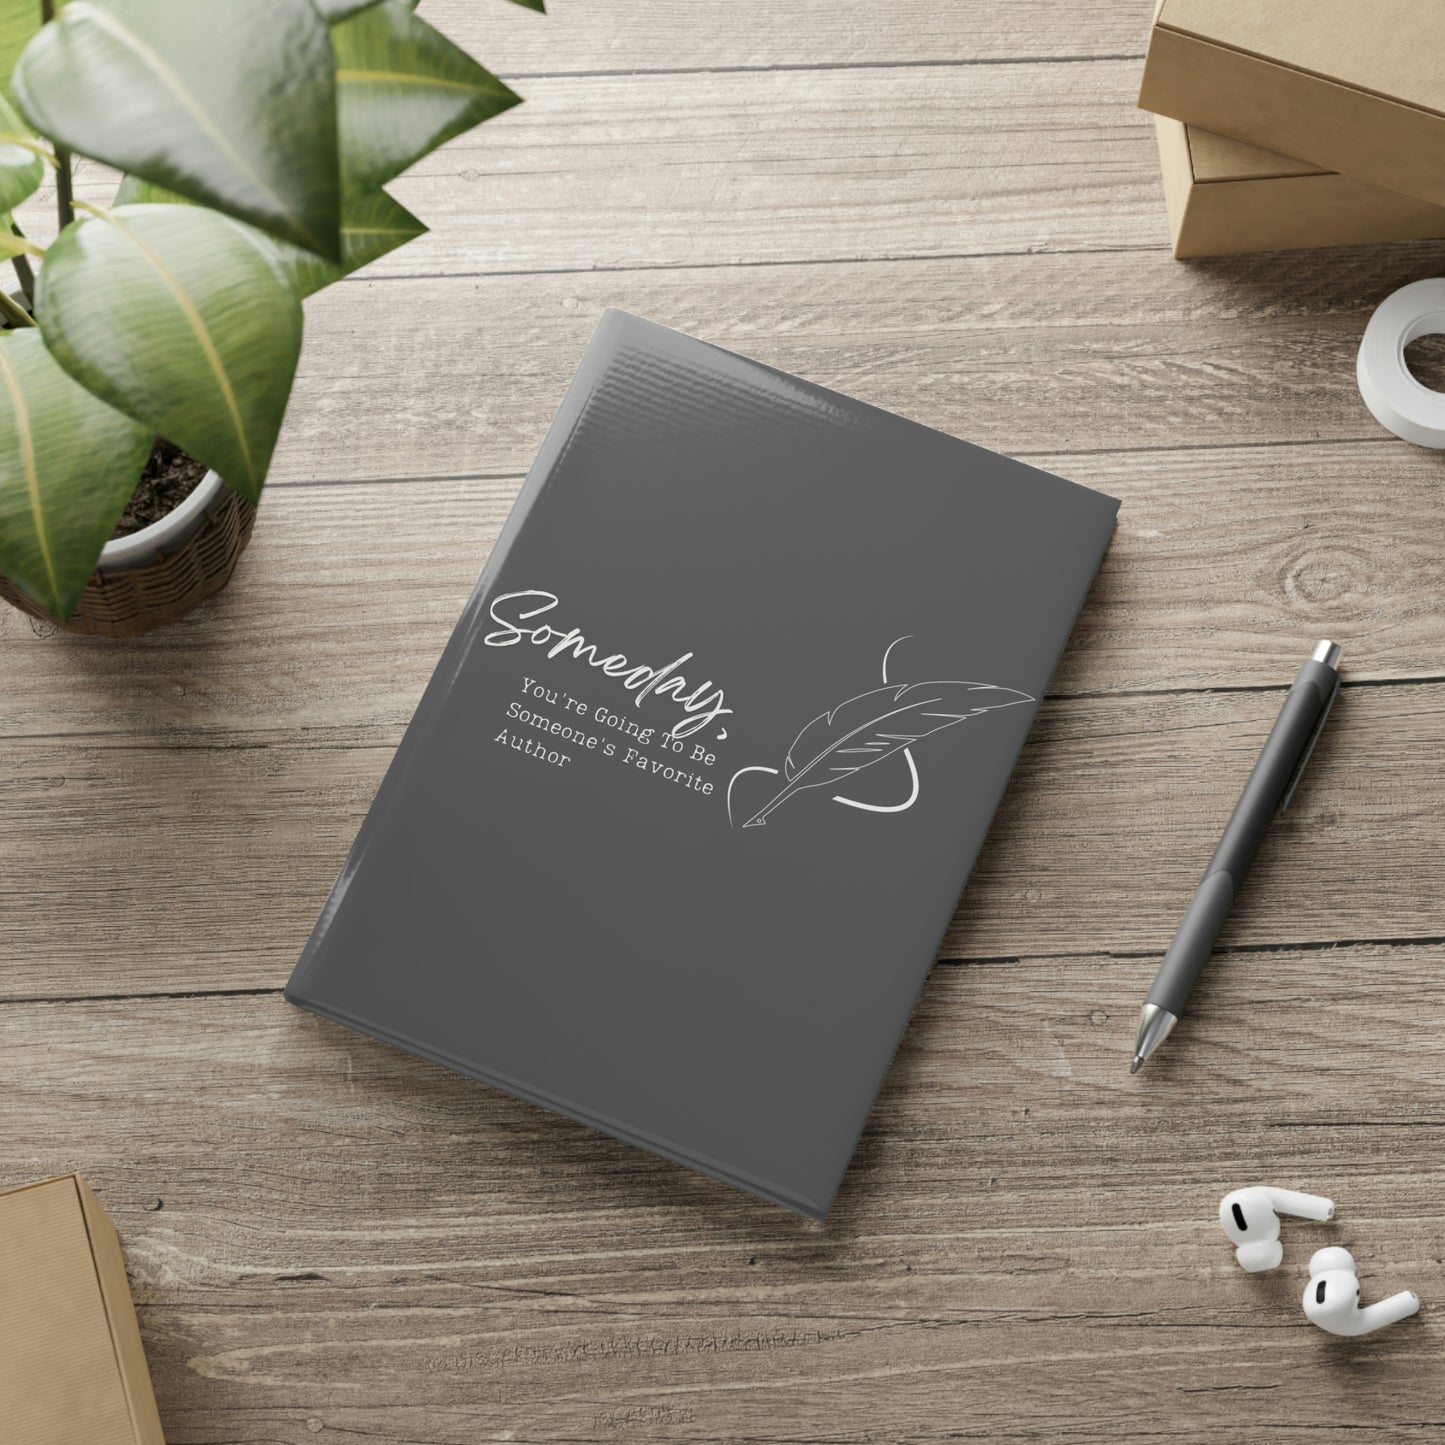 Hardcover Notebook with Puffy Covers (Gray) // Someday, you're going to be someone's favorite author // Write Out Loud